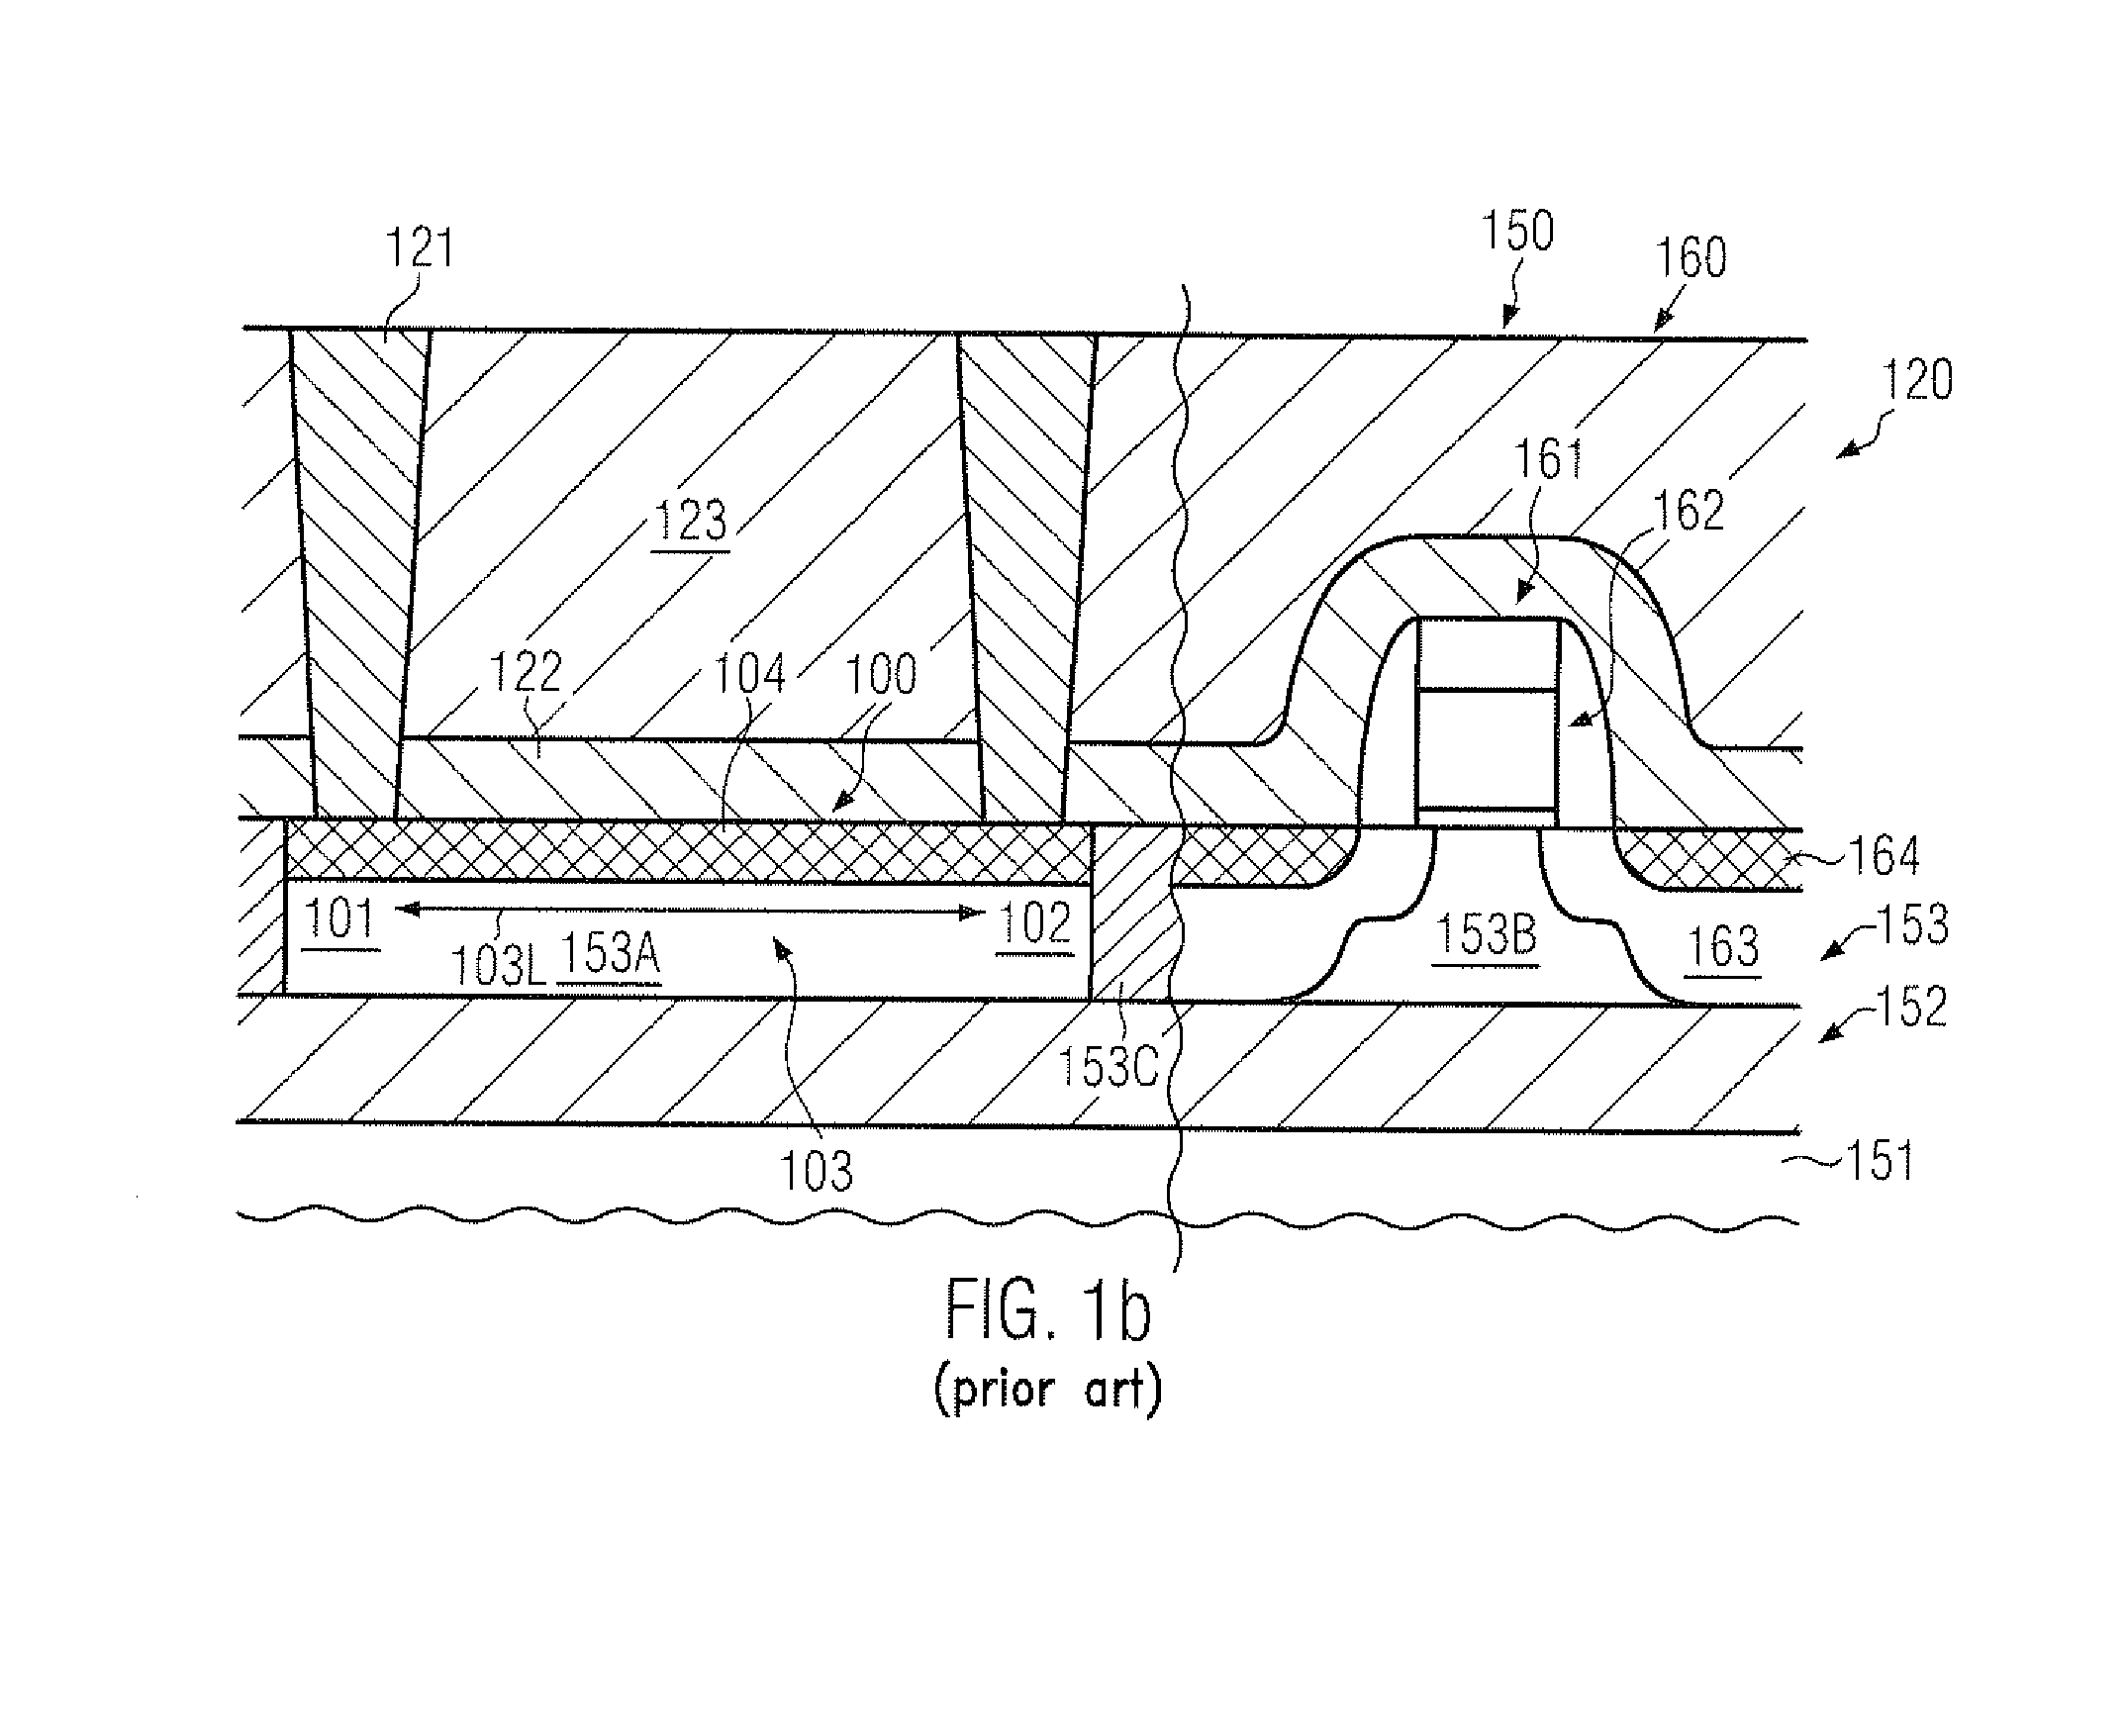 SILICON-BASED SEMICONDUCTOR DEVICE COMPRISING eFUSES FORMED BY AN EMBEDDED SEMICONDUCTOR ALLOY